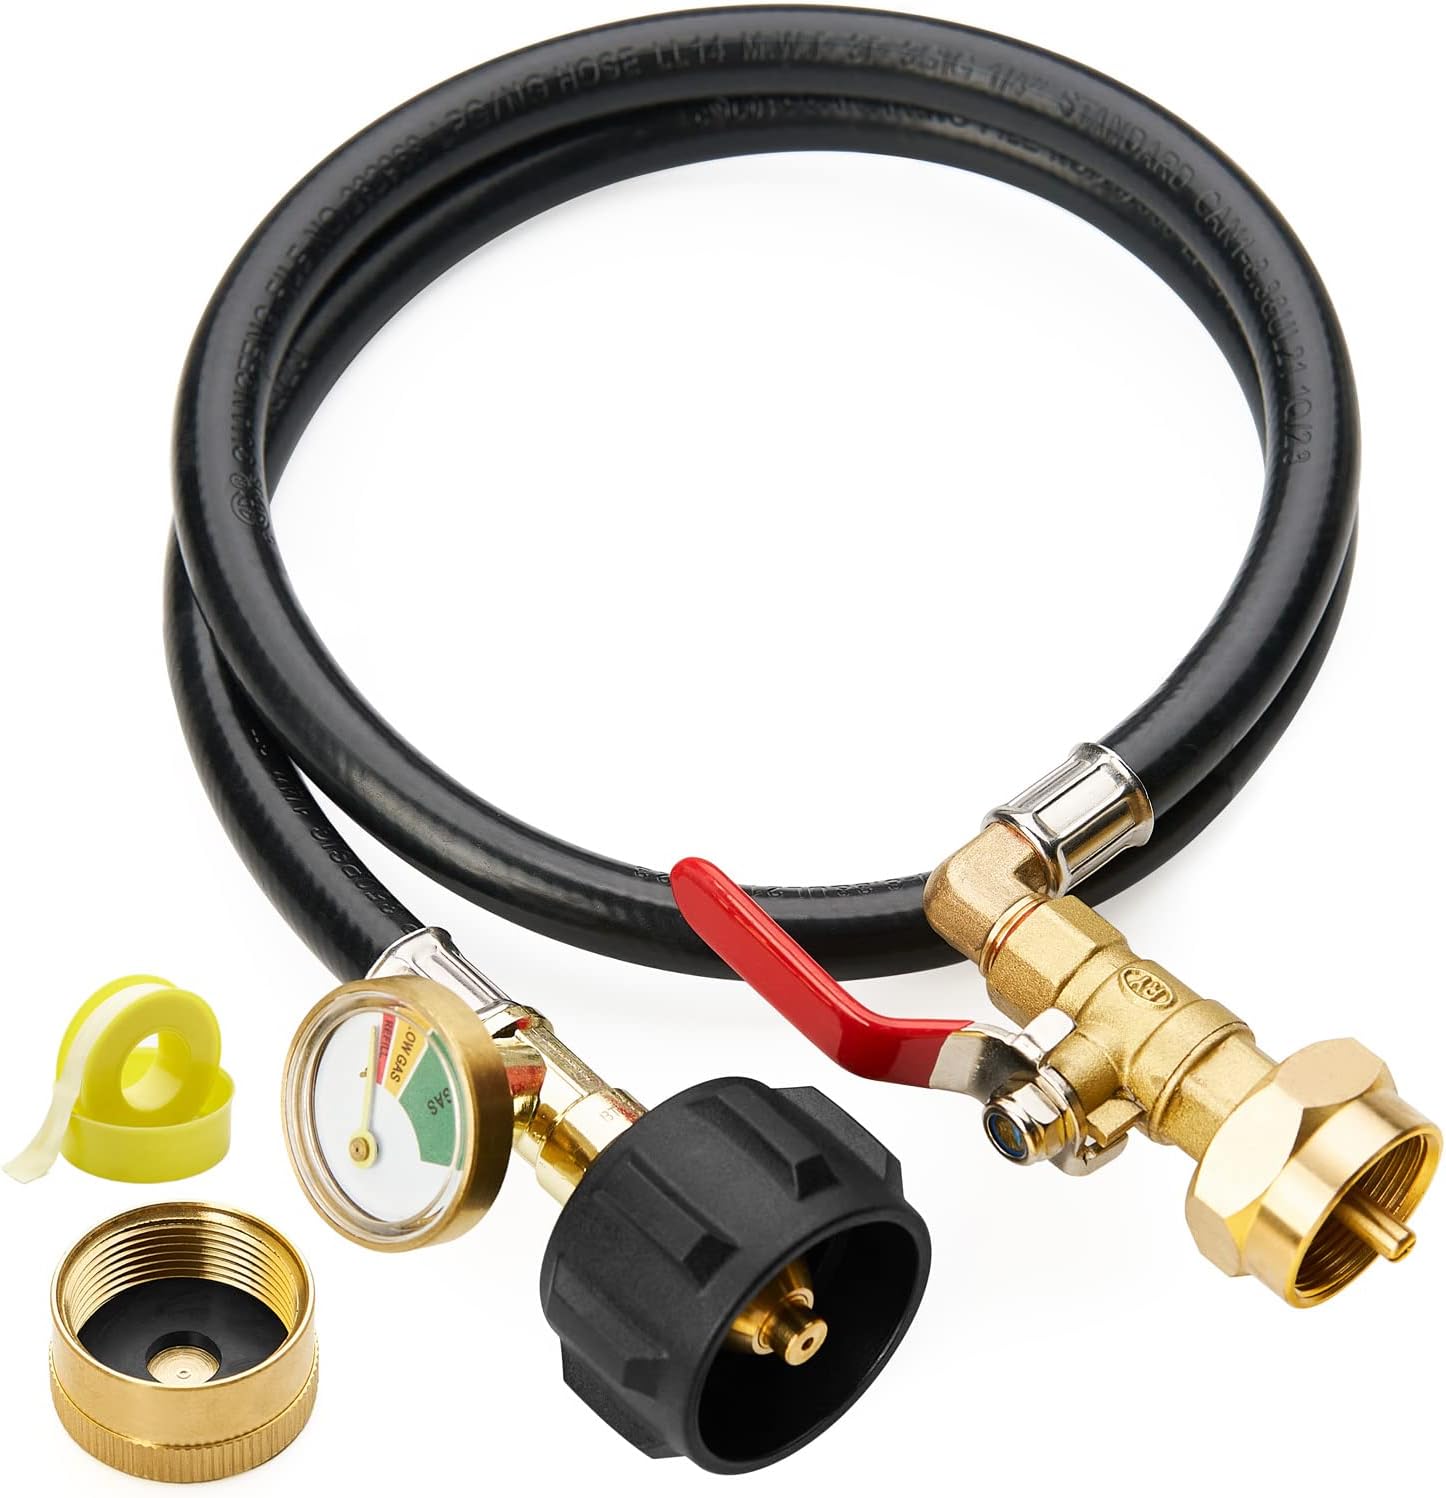 A black and gold 3 Feet Propane Refill Adapter Hose with Gauge & ON/OFF Control Valve.